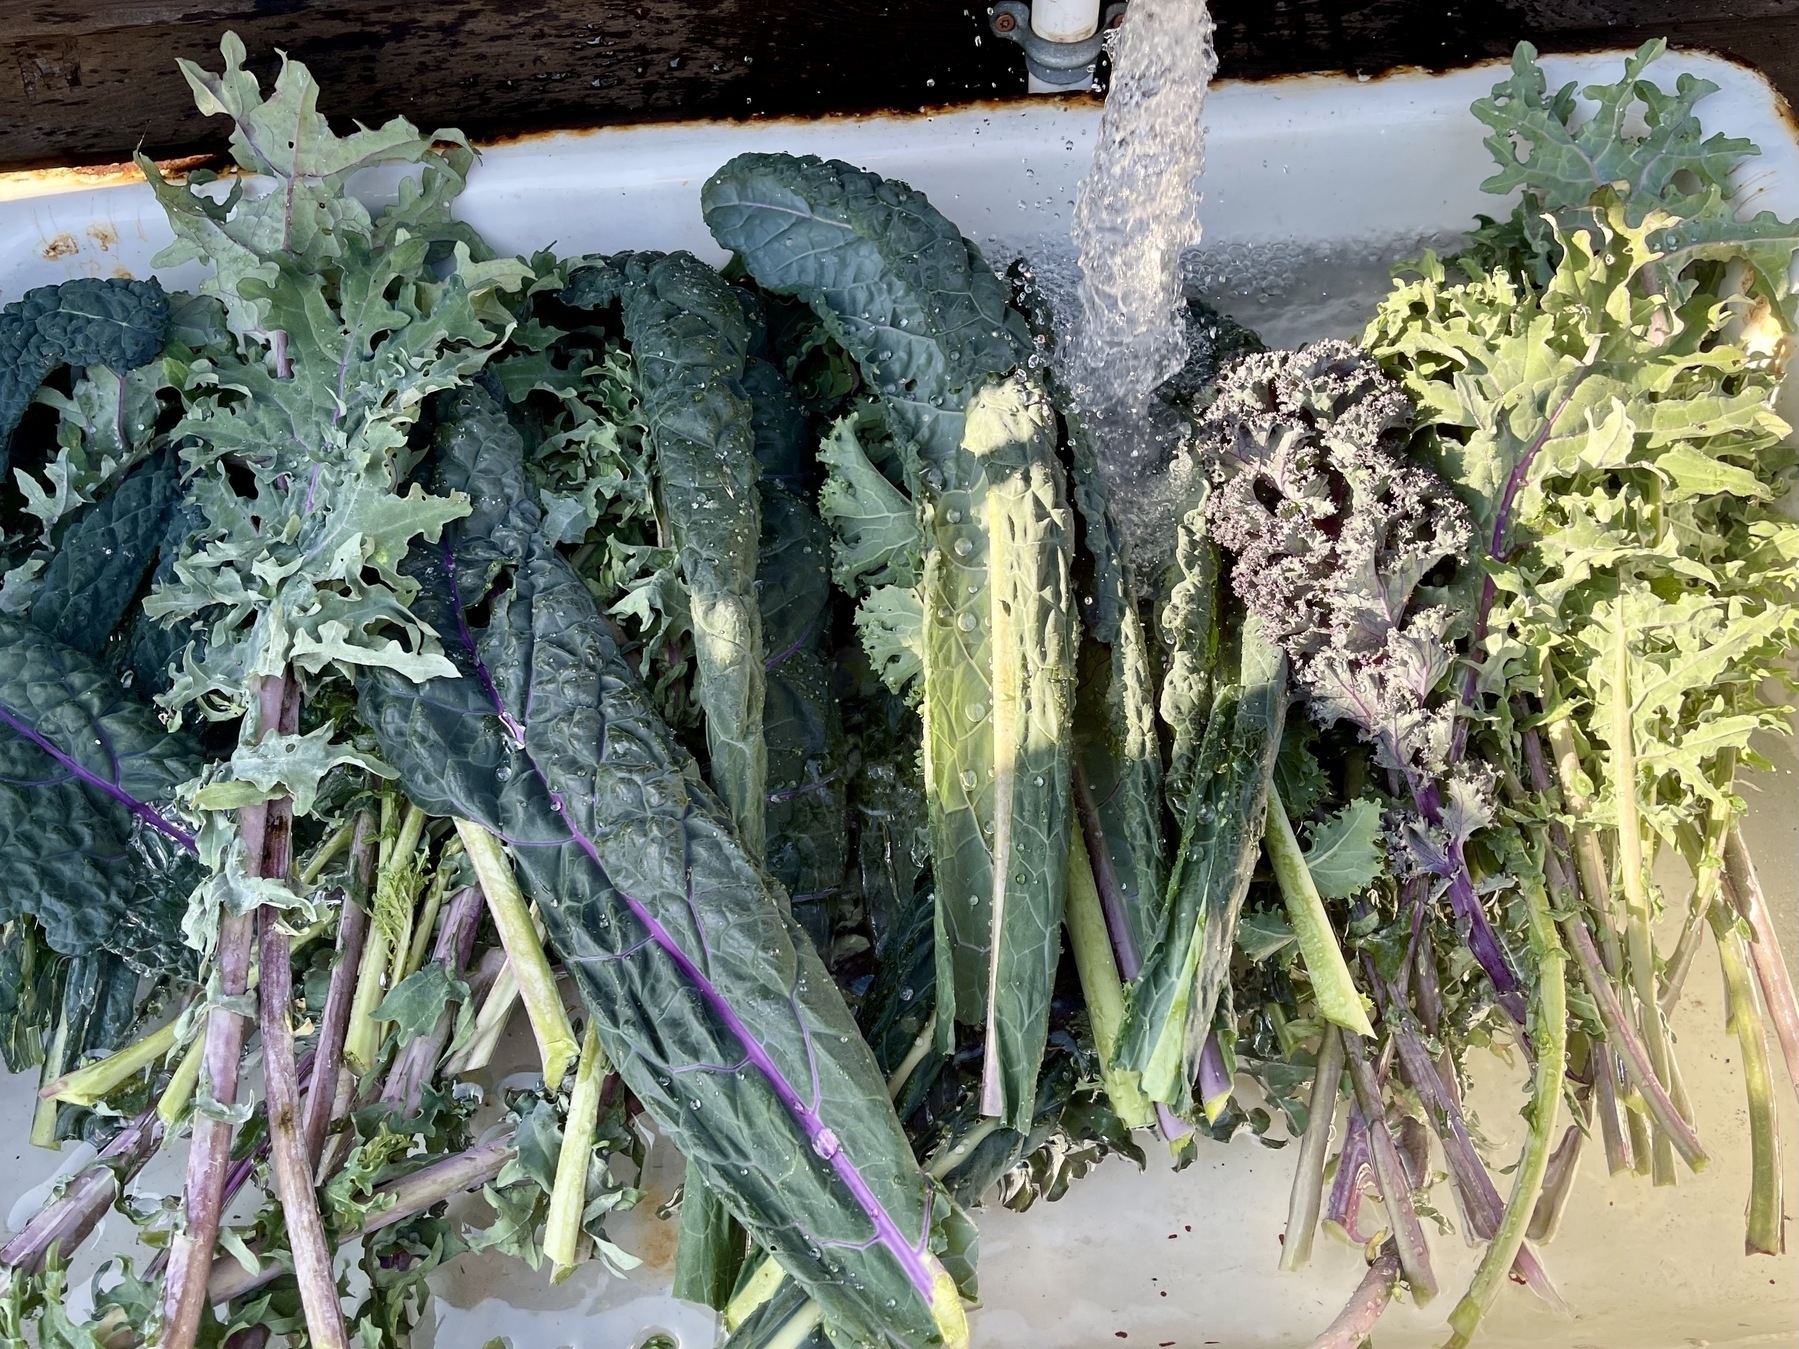 Kale being washed in a big basin.